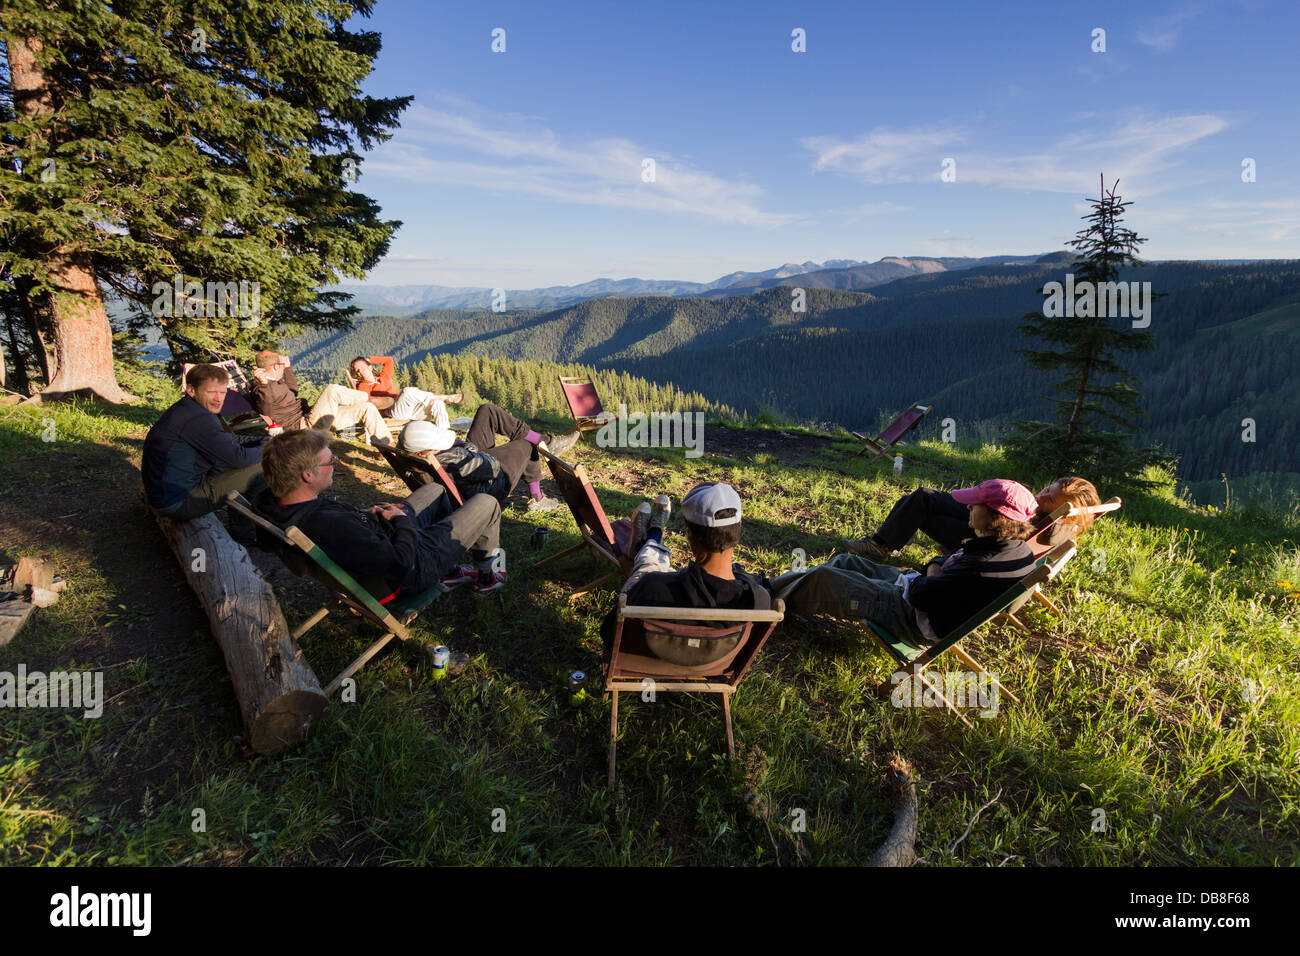 Group of people relaxing in chairs outdoors on vehicle supported mountain bike trip in South Western Colorado. Stock Photo